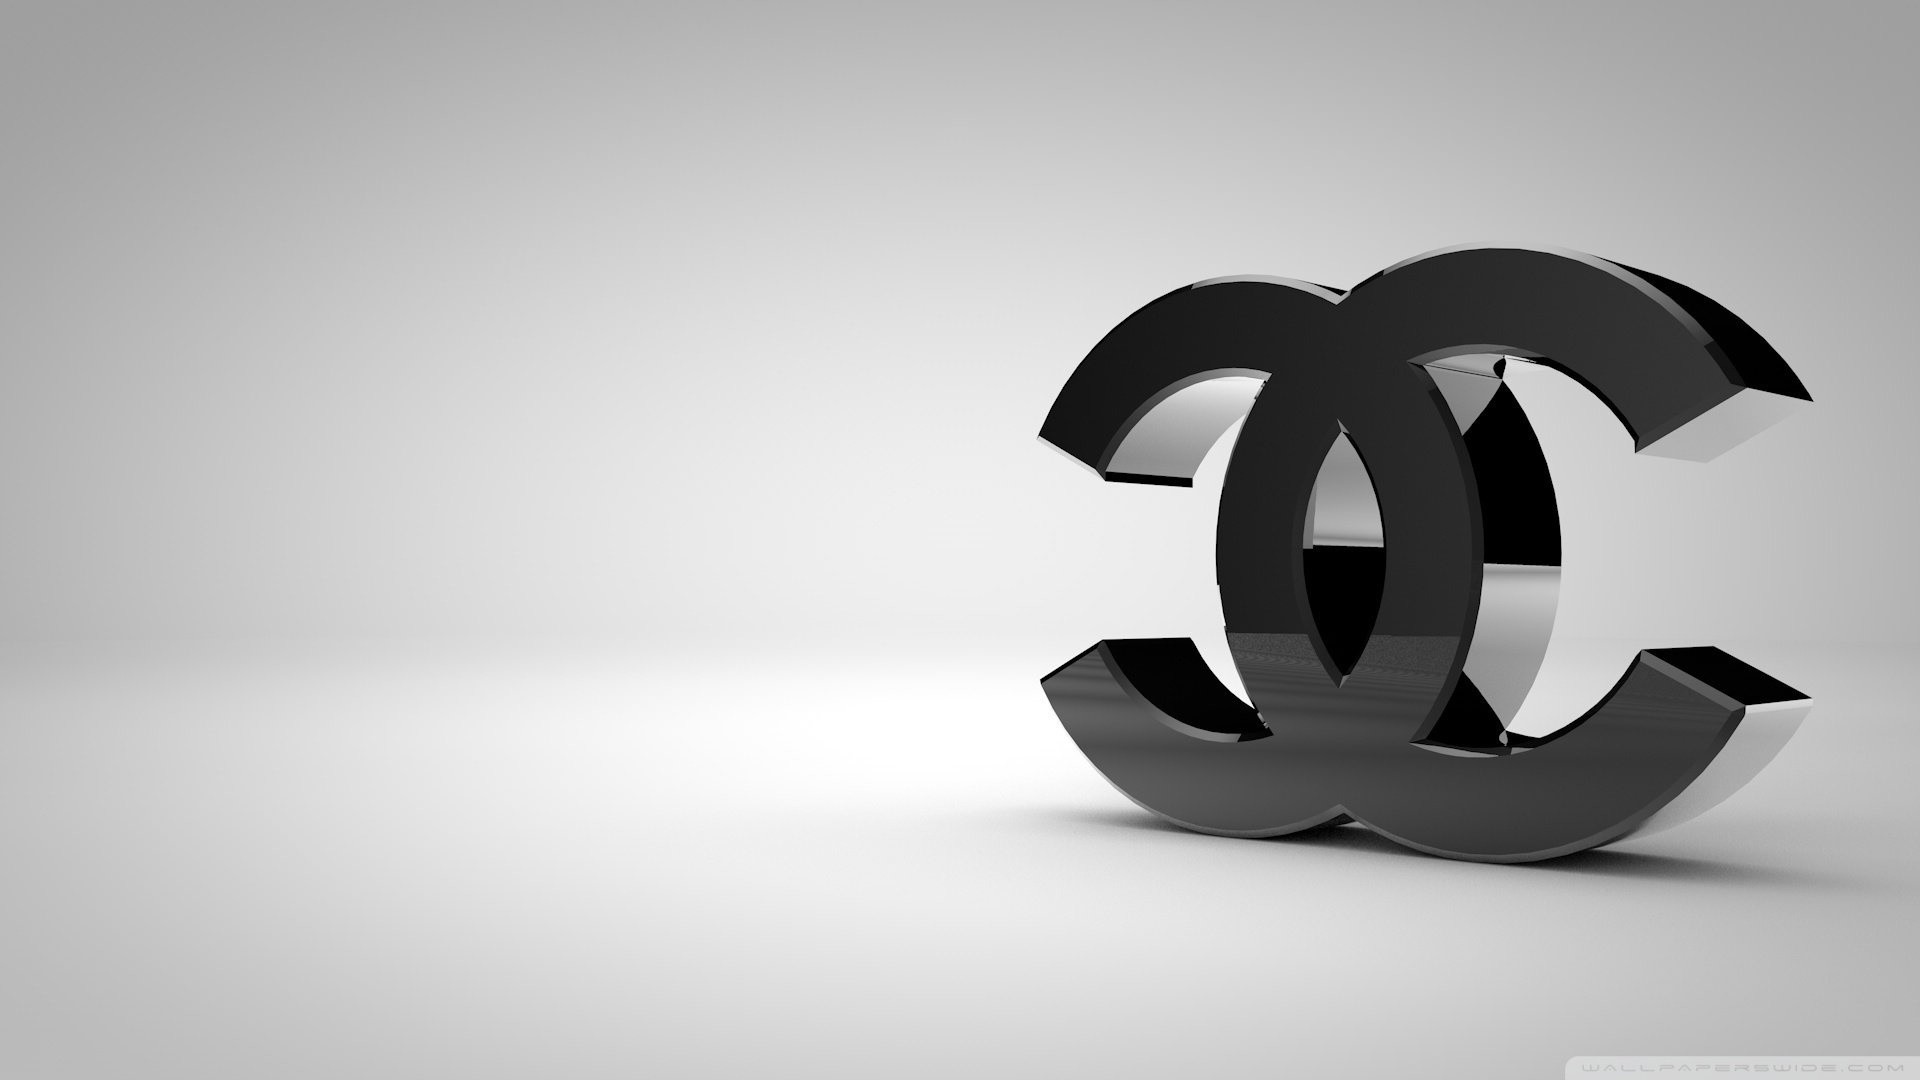 1920x1080 Brands, Chanel, Chanel Backgrounds, Chanel Logo, Fashion Brands, Brands  Chanel Logo